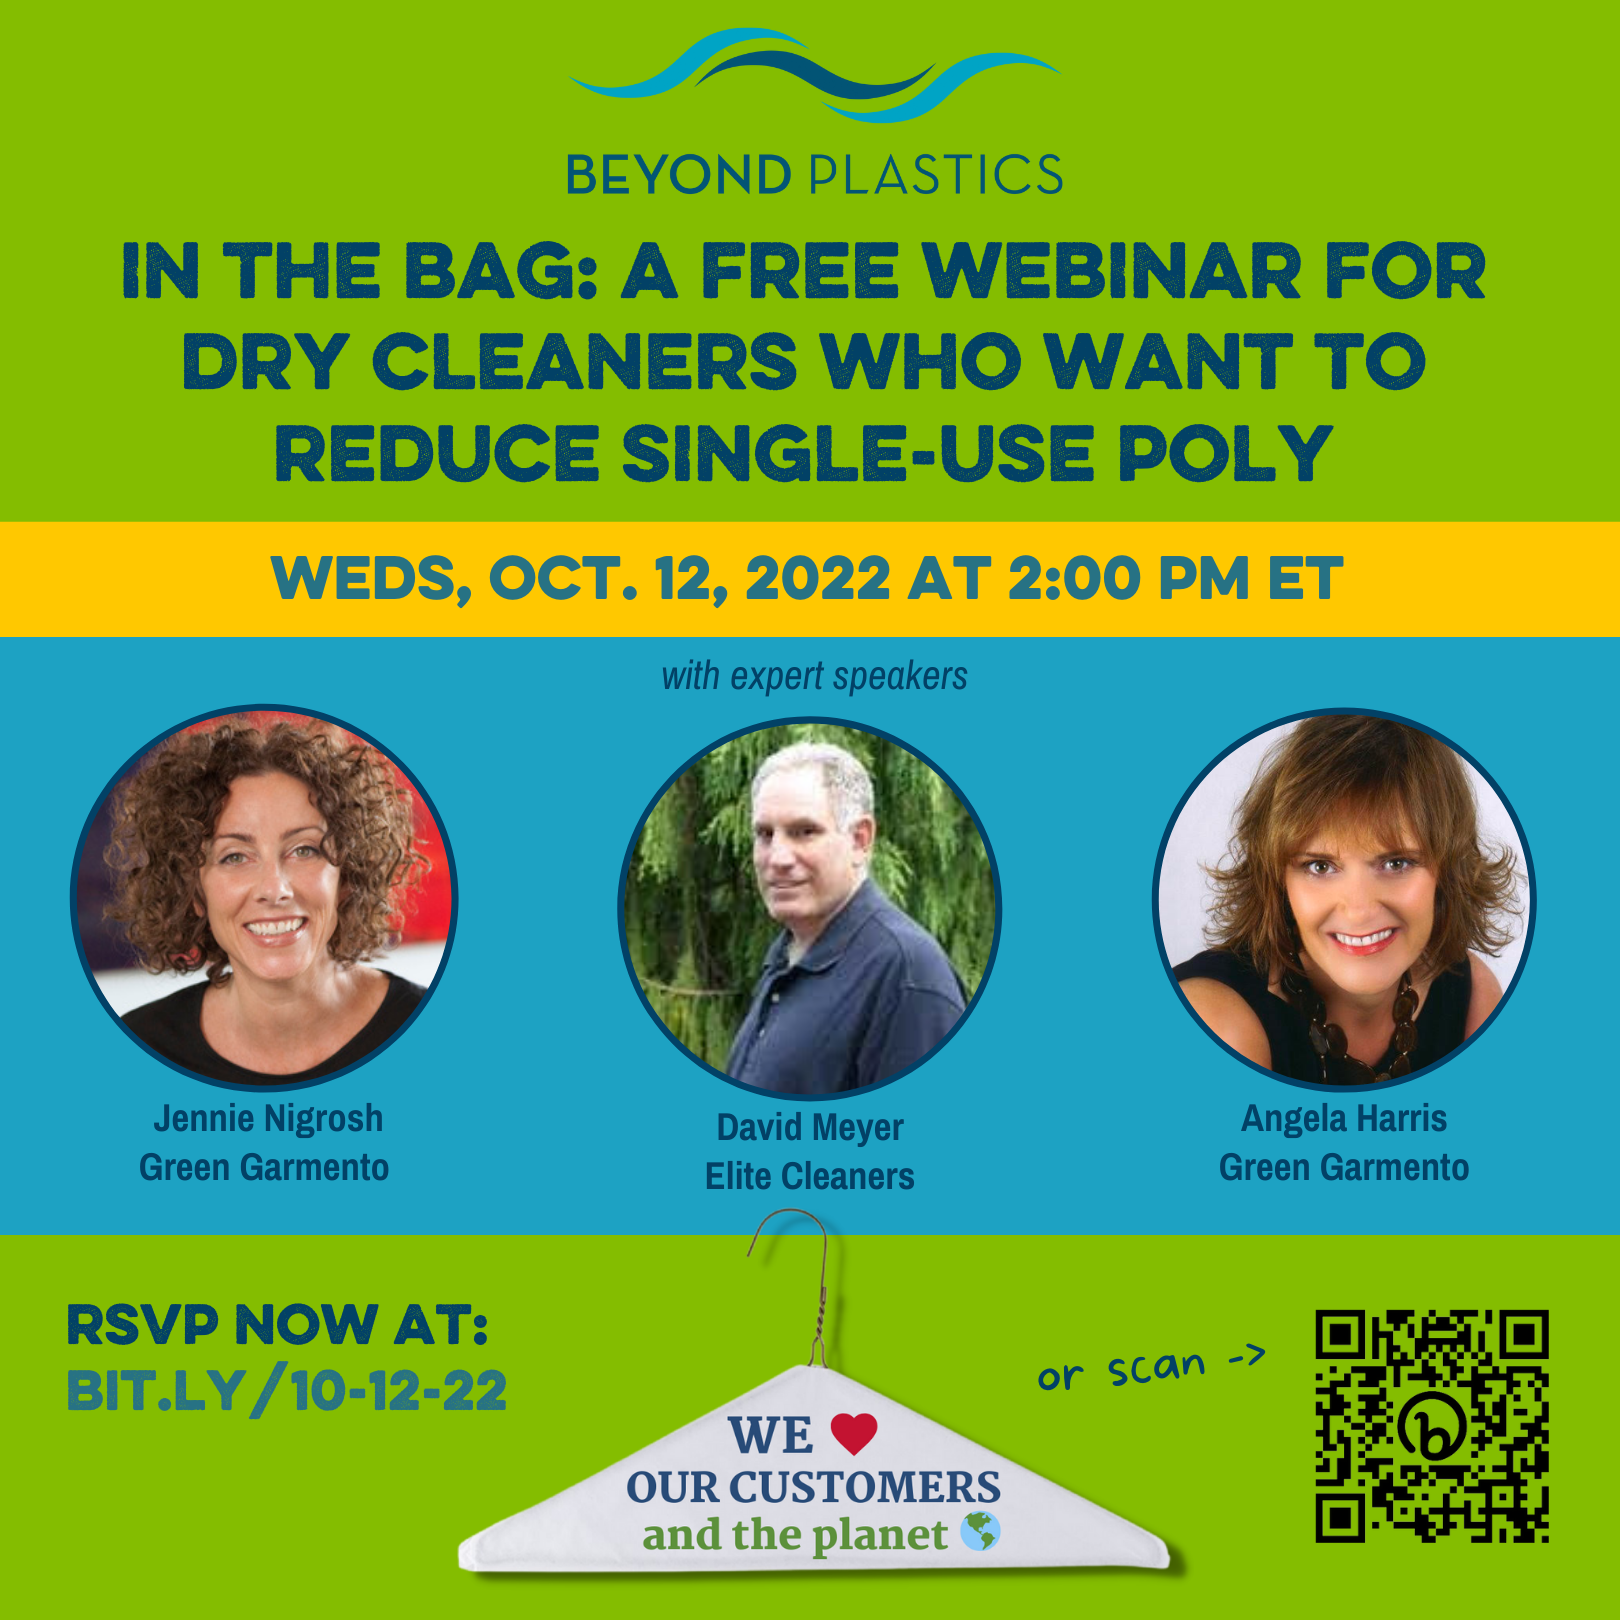 In the Bag: A Free Webinar for Dry Cleaners Who Want to Reduce Single-Use Poly